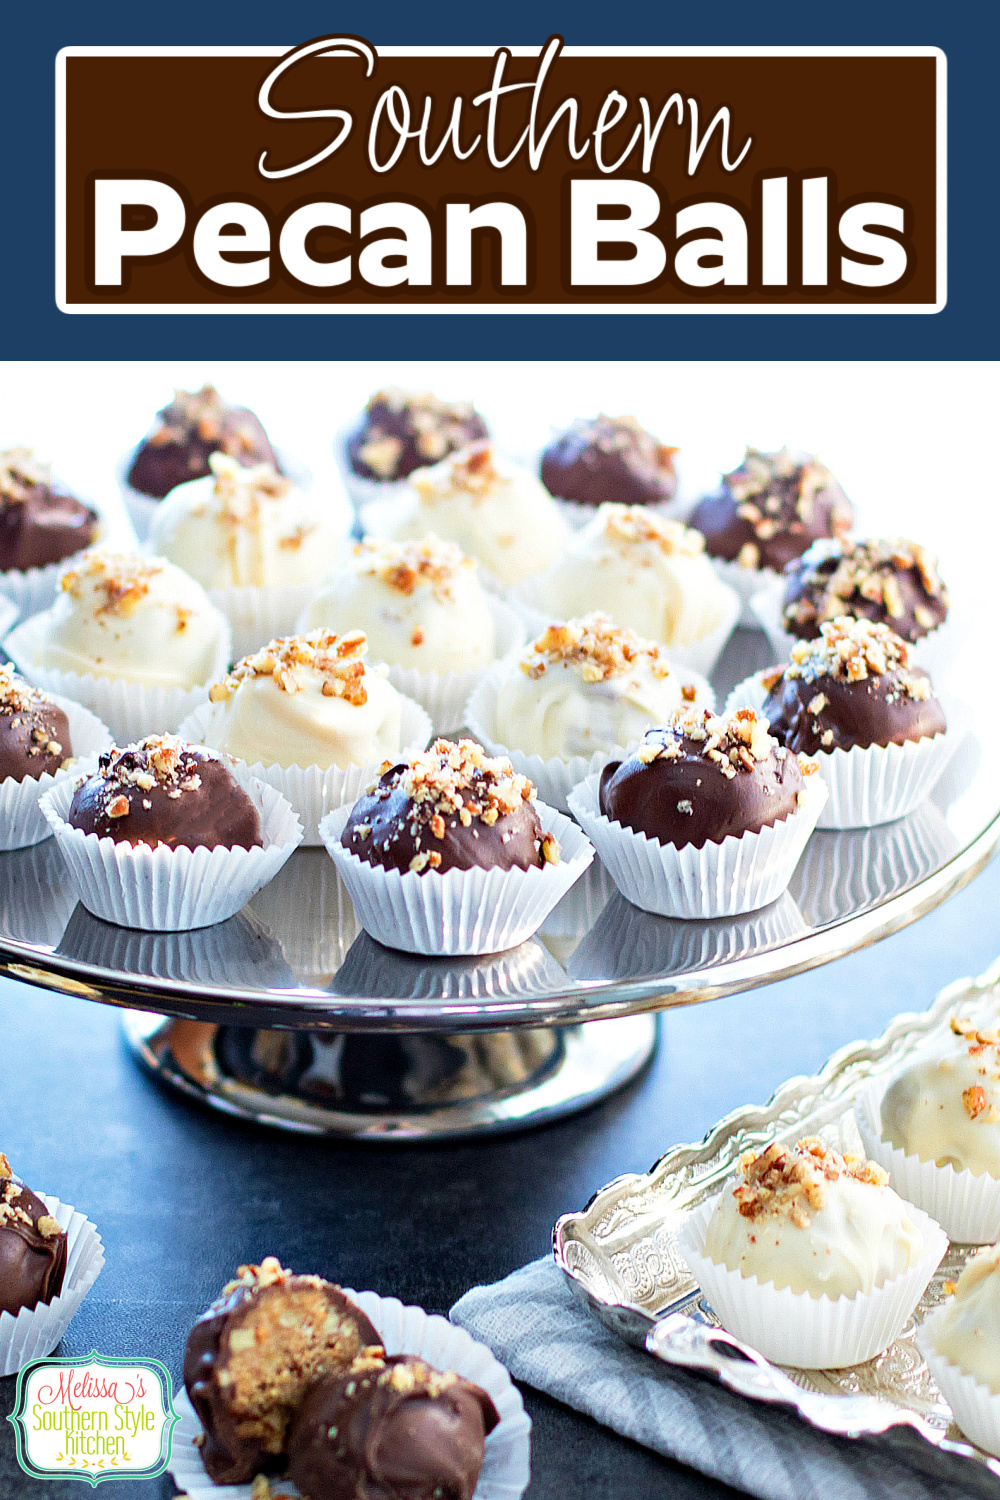 These no bake Pecan Balls are impossible to resist #pecanballs #pecans #candy #christmascandy #pecanballsrecipe #southernfood #Christmascandy #holidayrecipes #southernrecipes #easyrecipes #chocolate #whitechocolate via @melissasssk